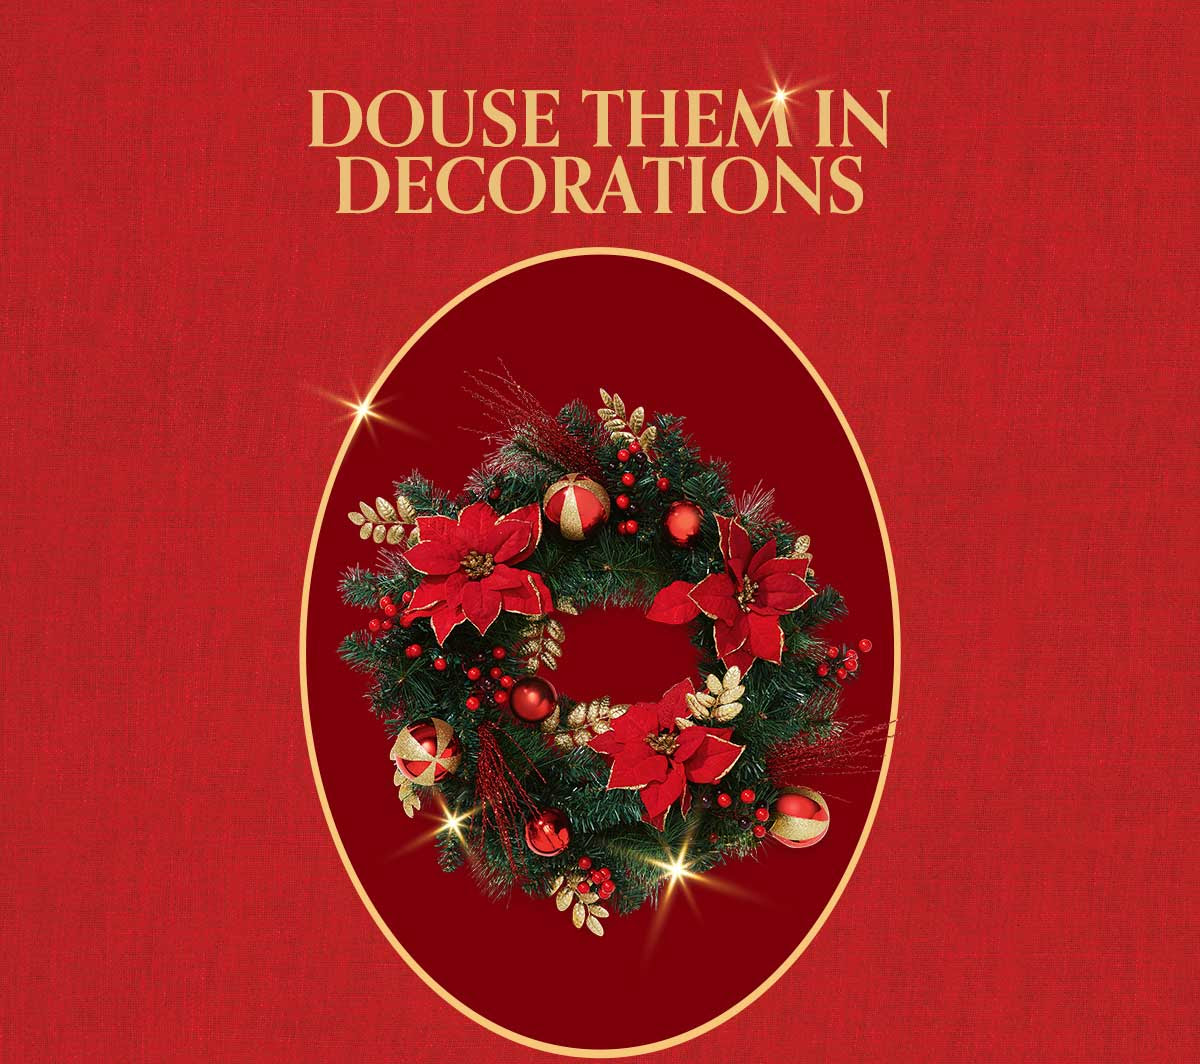 Douse them in Decorations